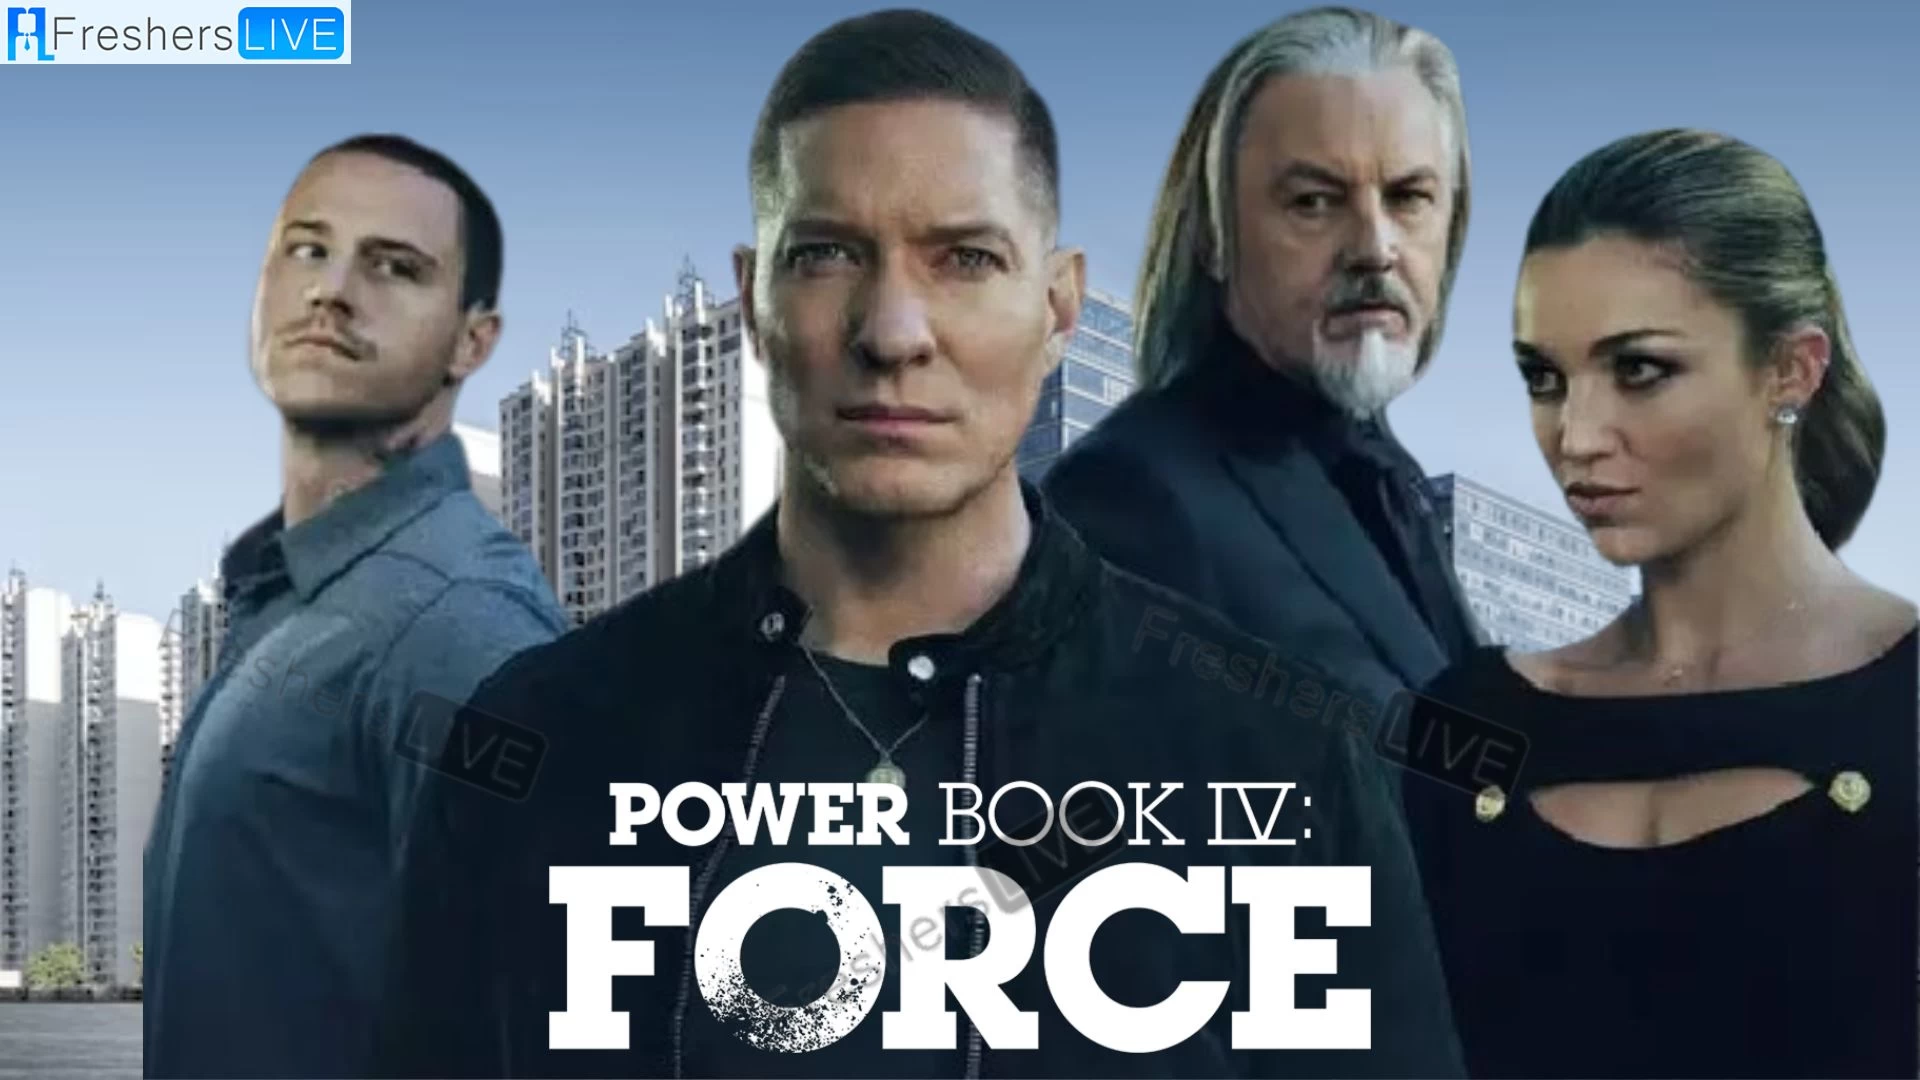 Power Book IV Force Season 2 Episode 5 Ending Explained, Cast, Plot and More